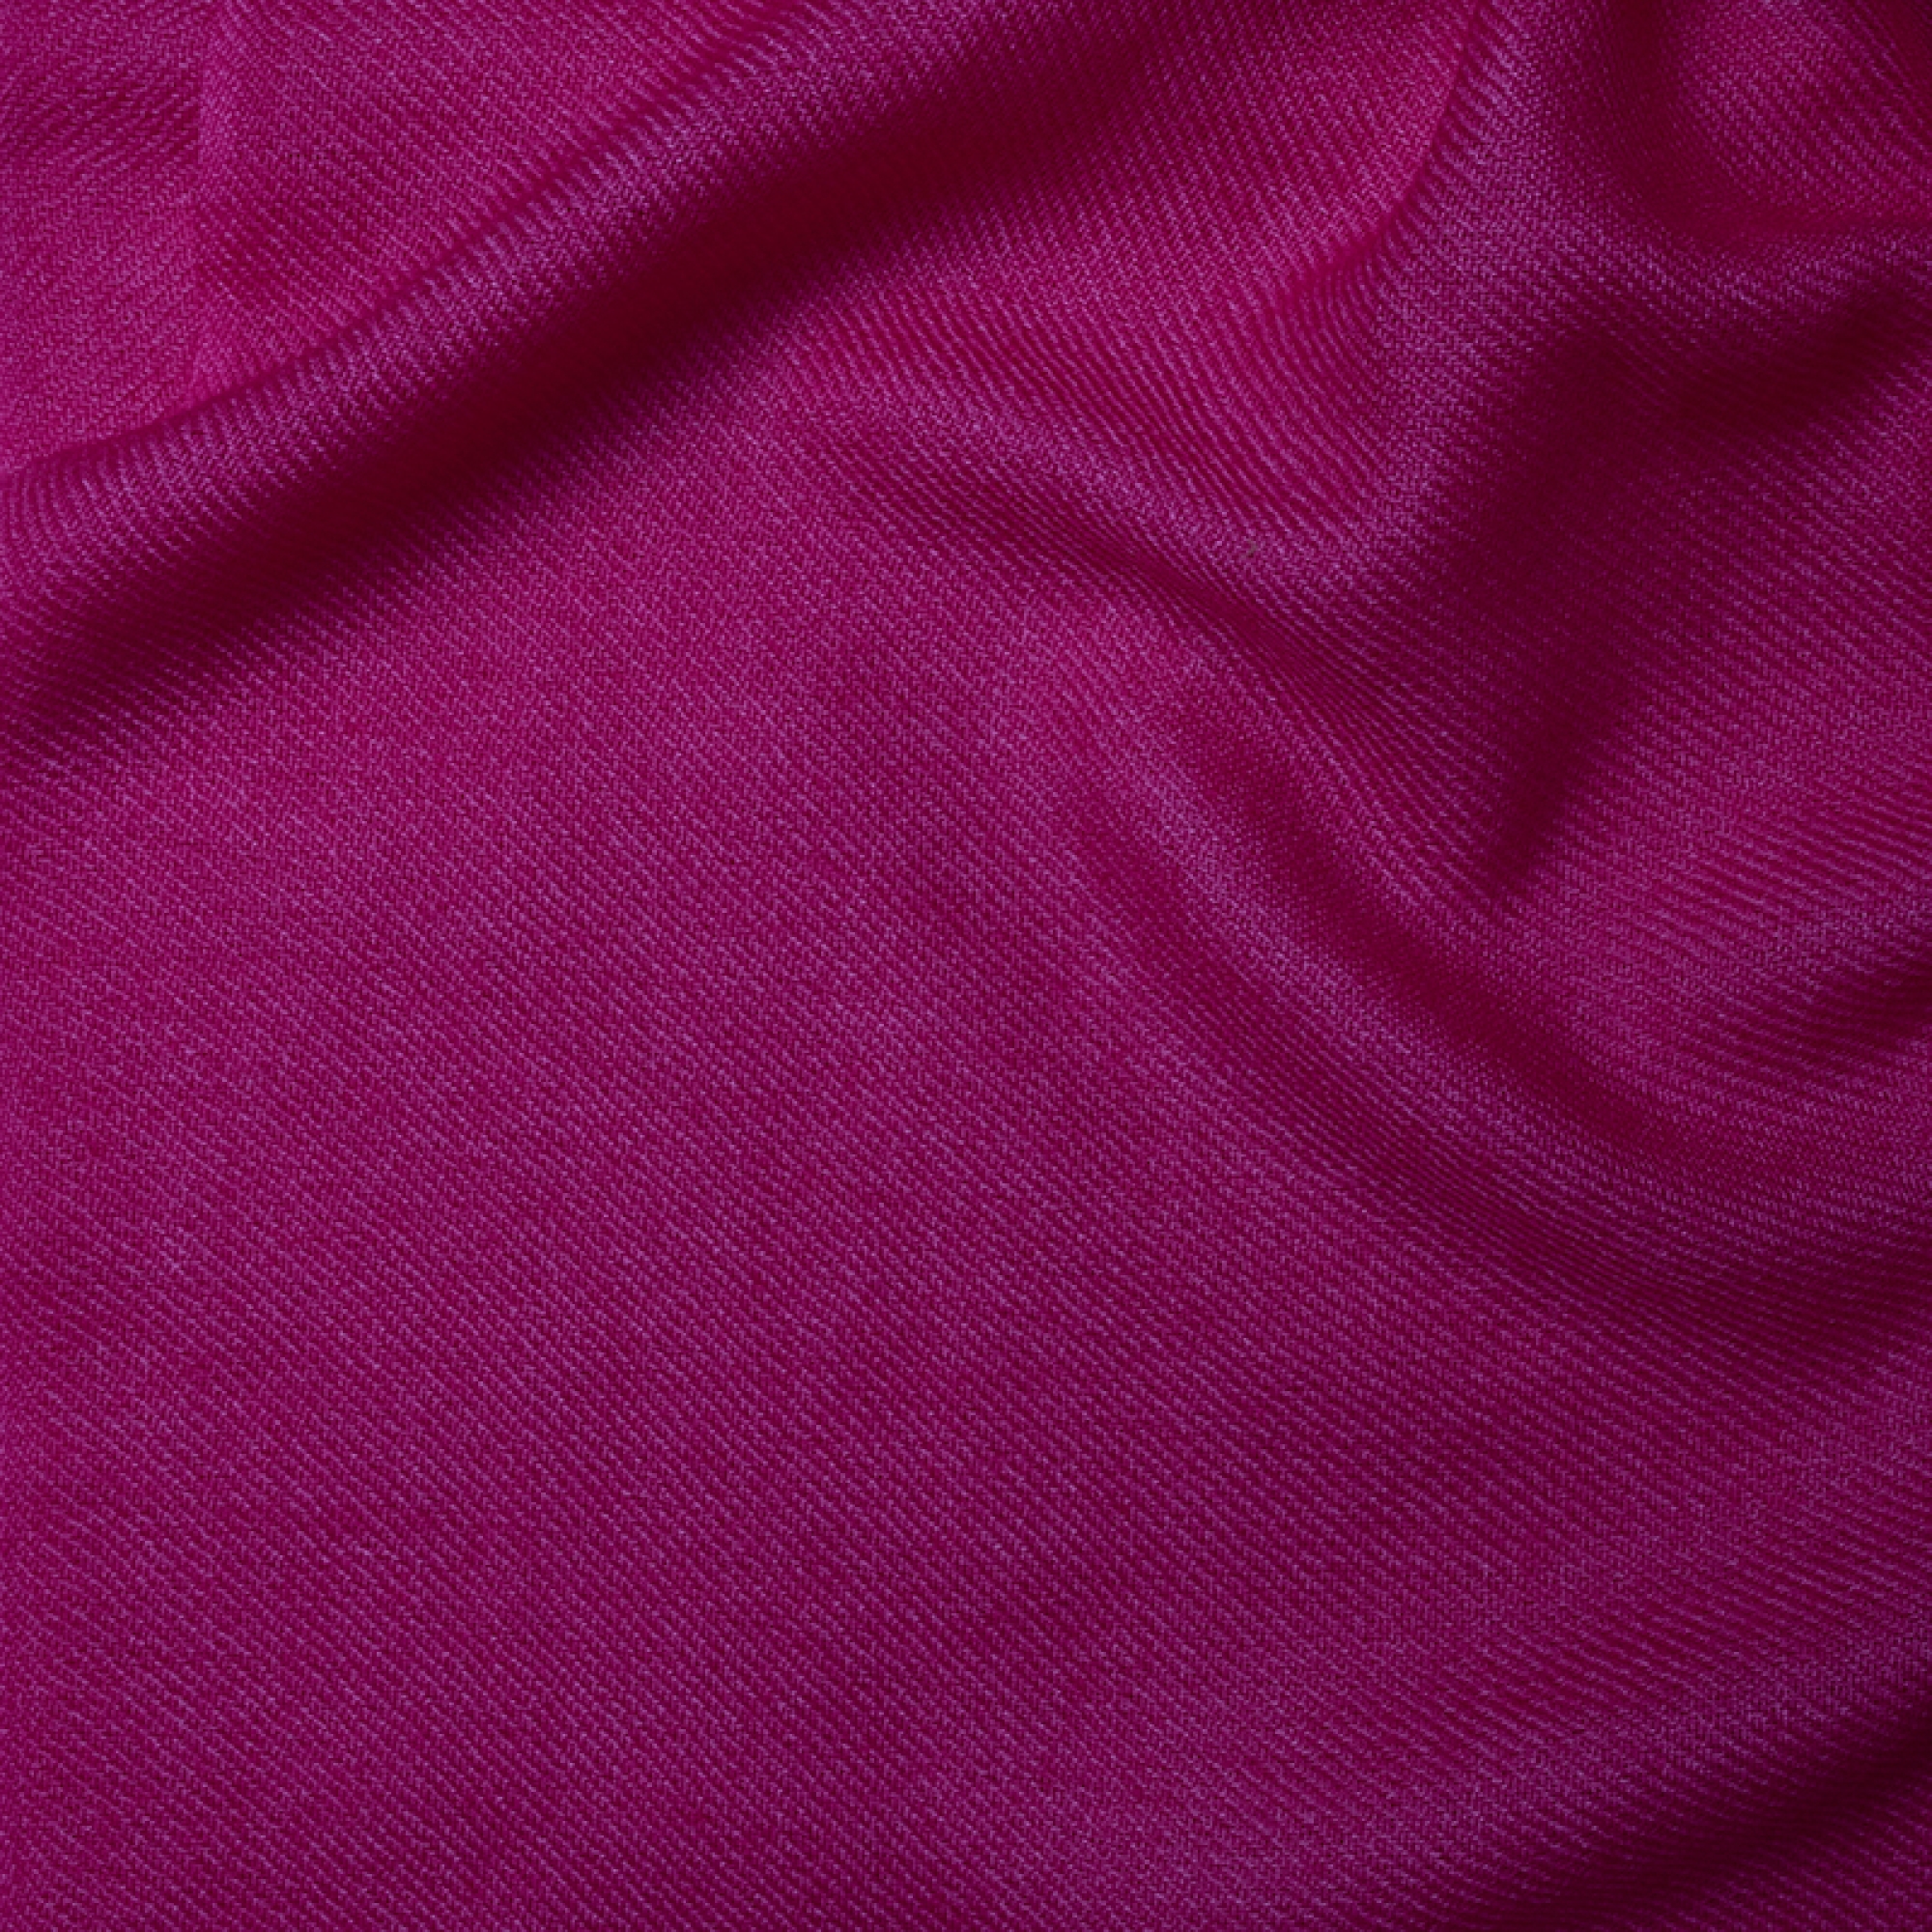 Cashmere accessories exclusive toodoo plain m 180 x 220 flashing pink 180 x 220 cm